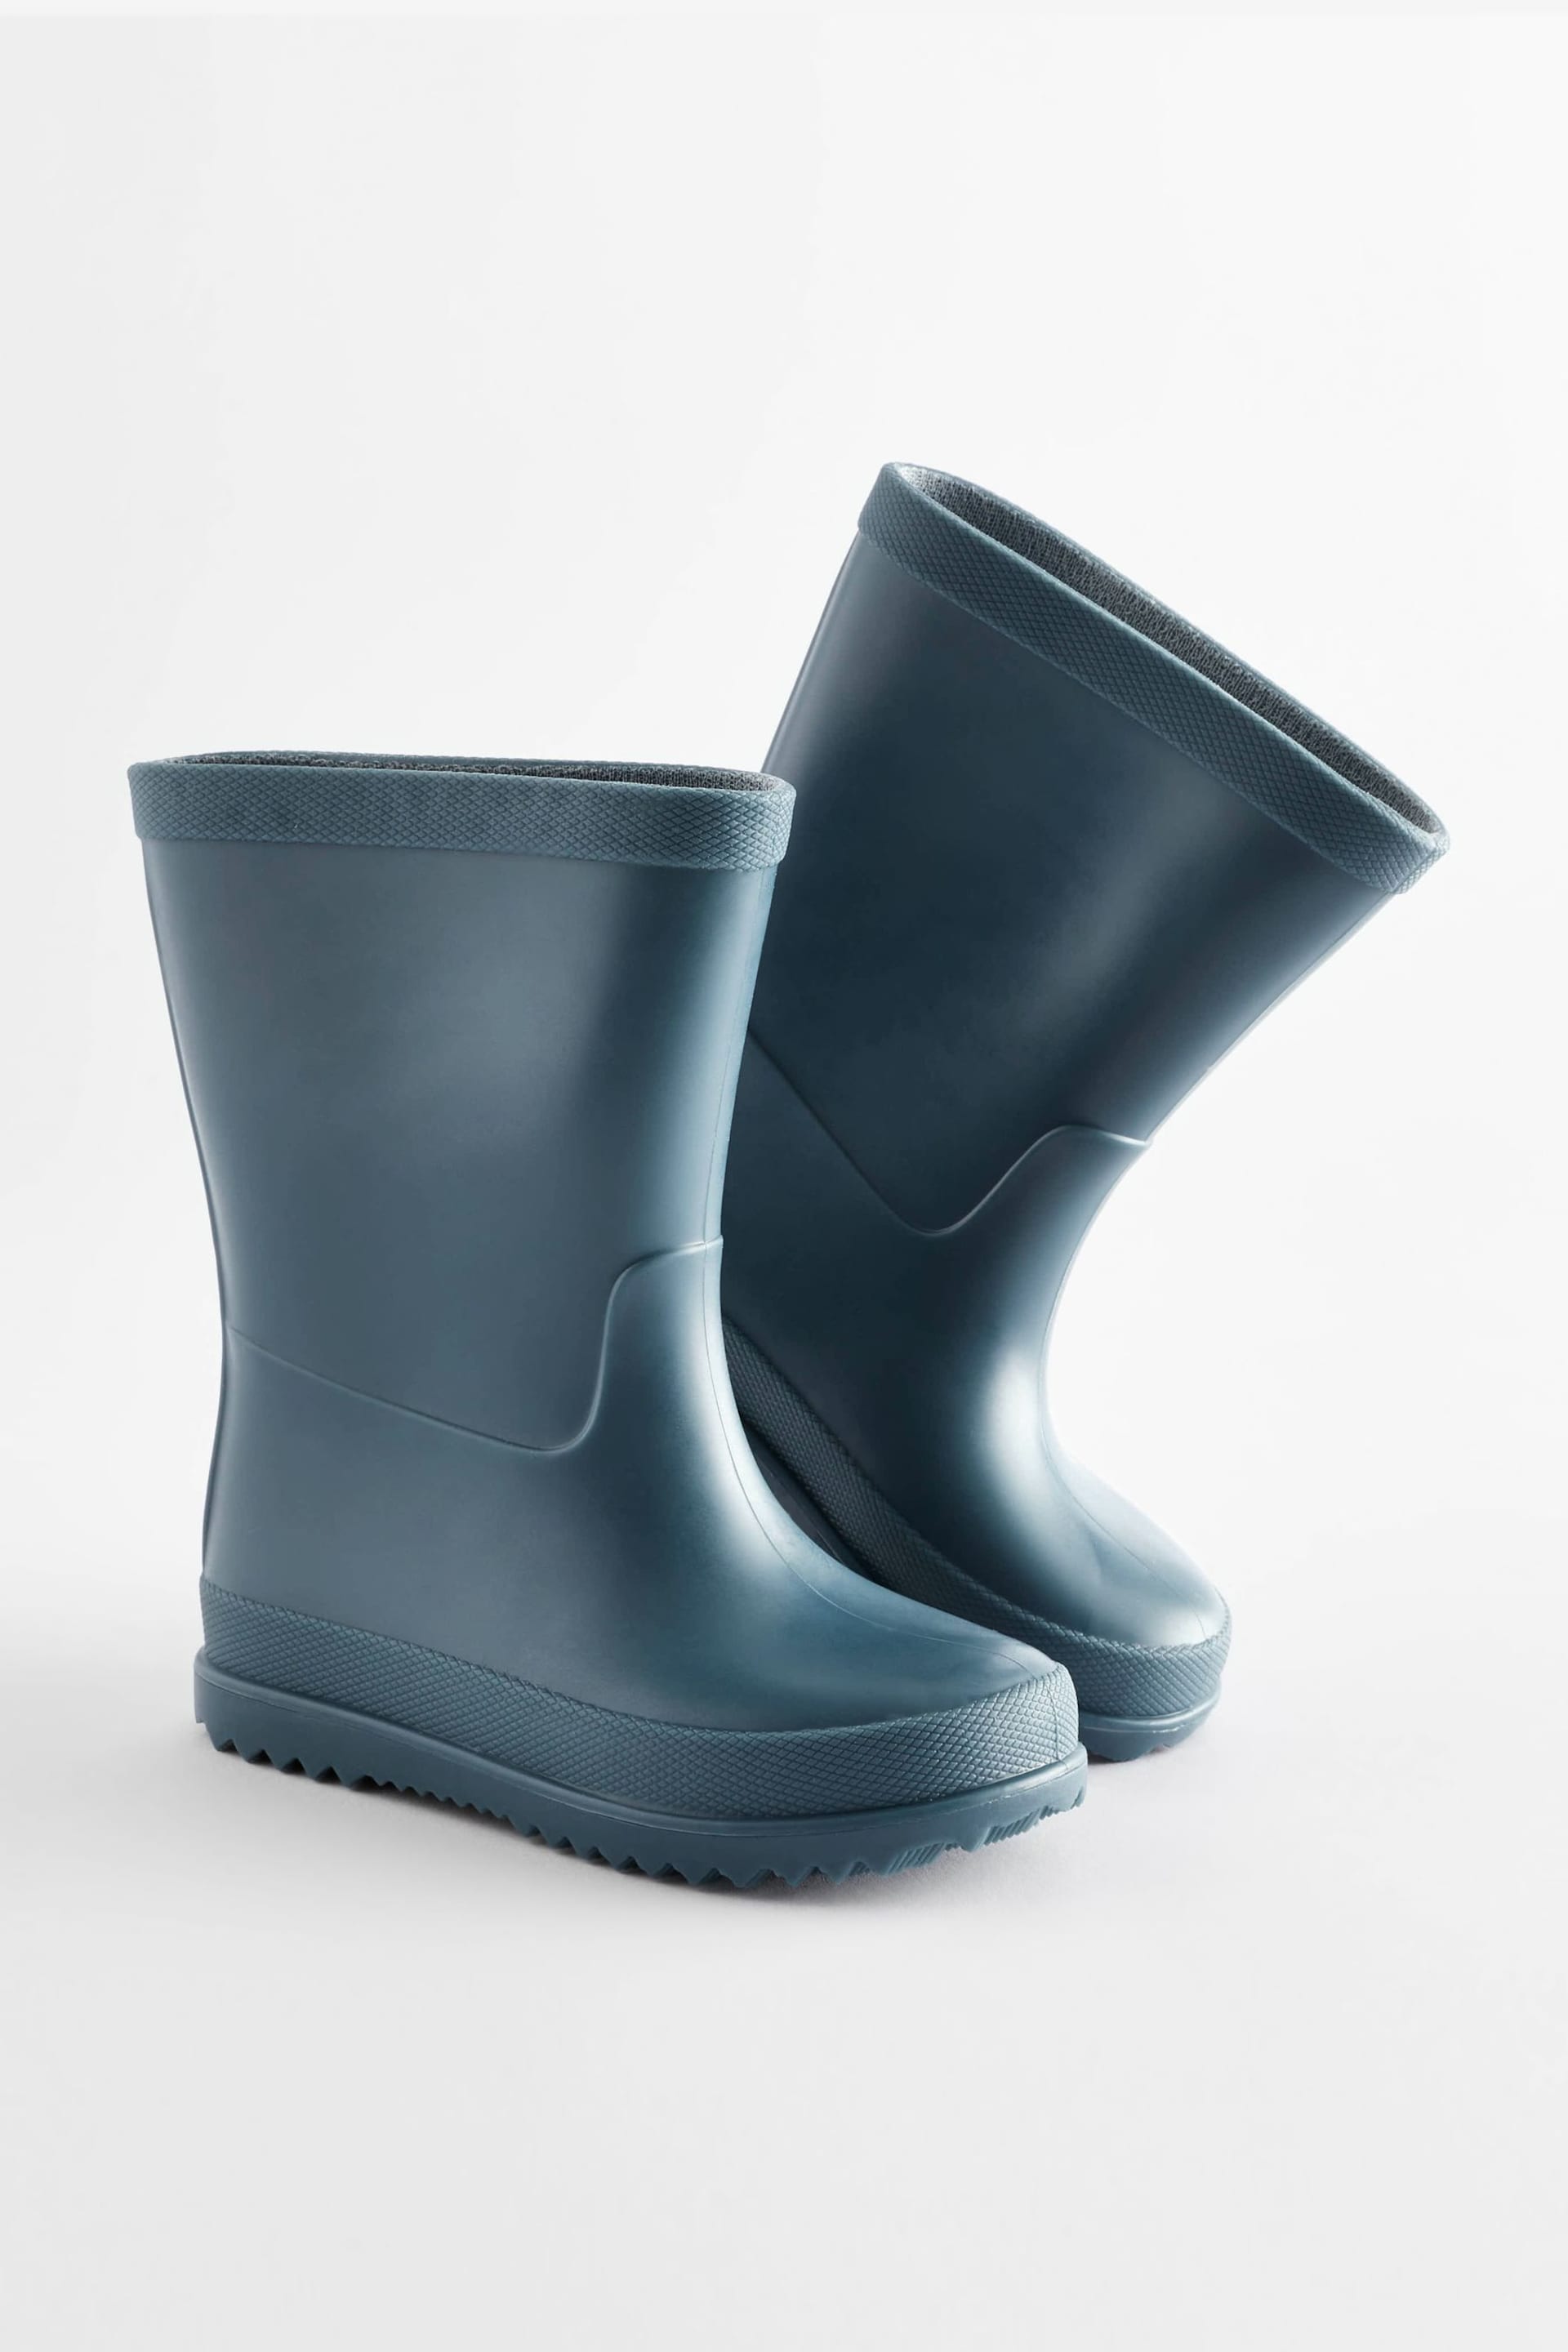 Teal Blue Wellies - Image 4 of 6